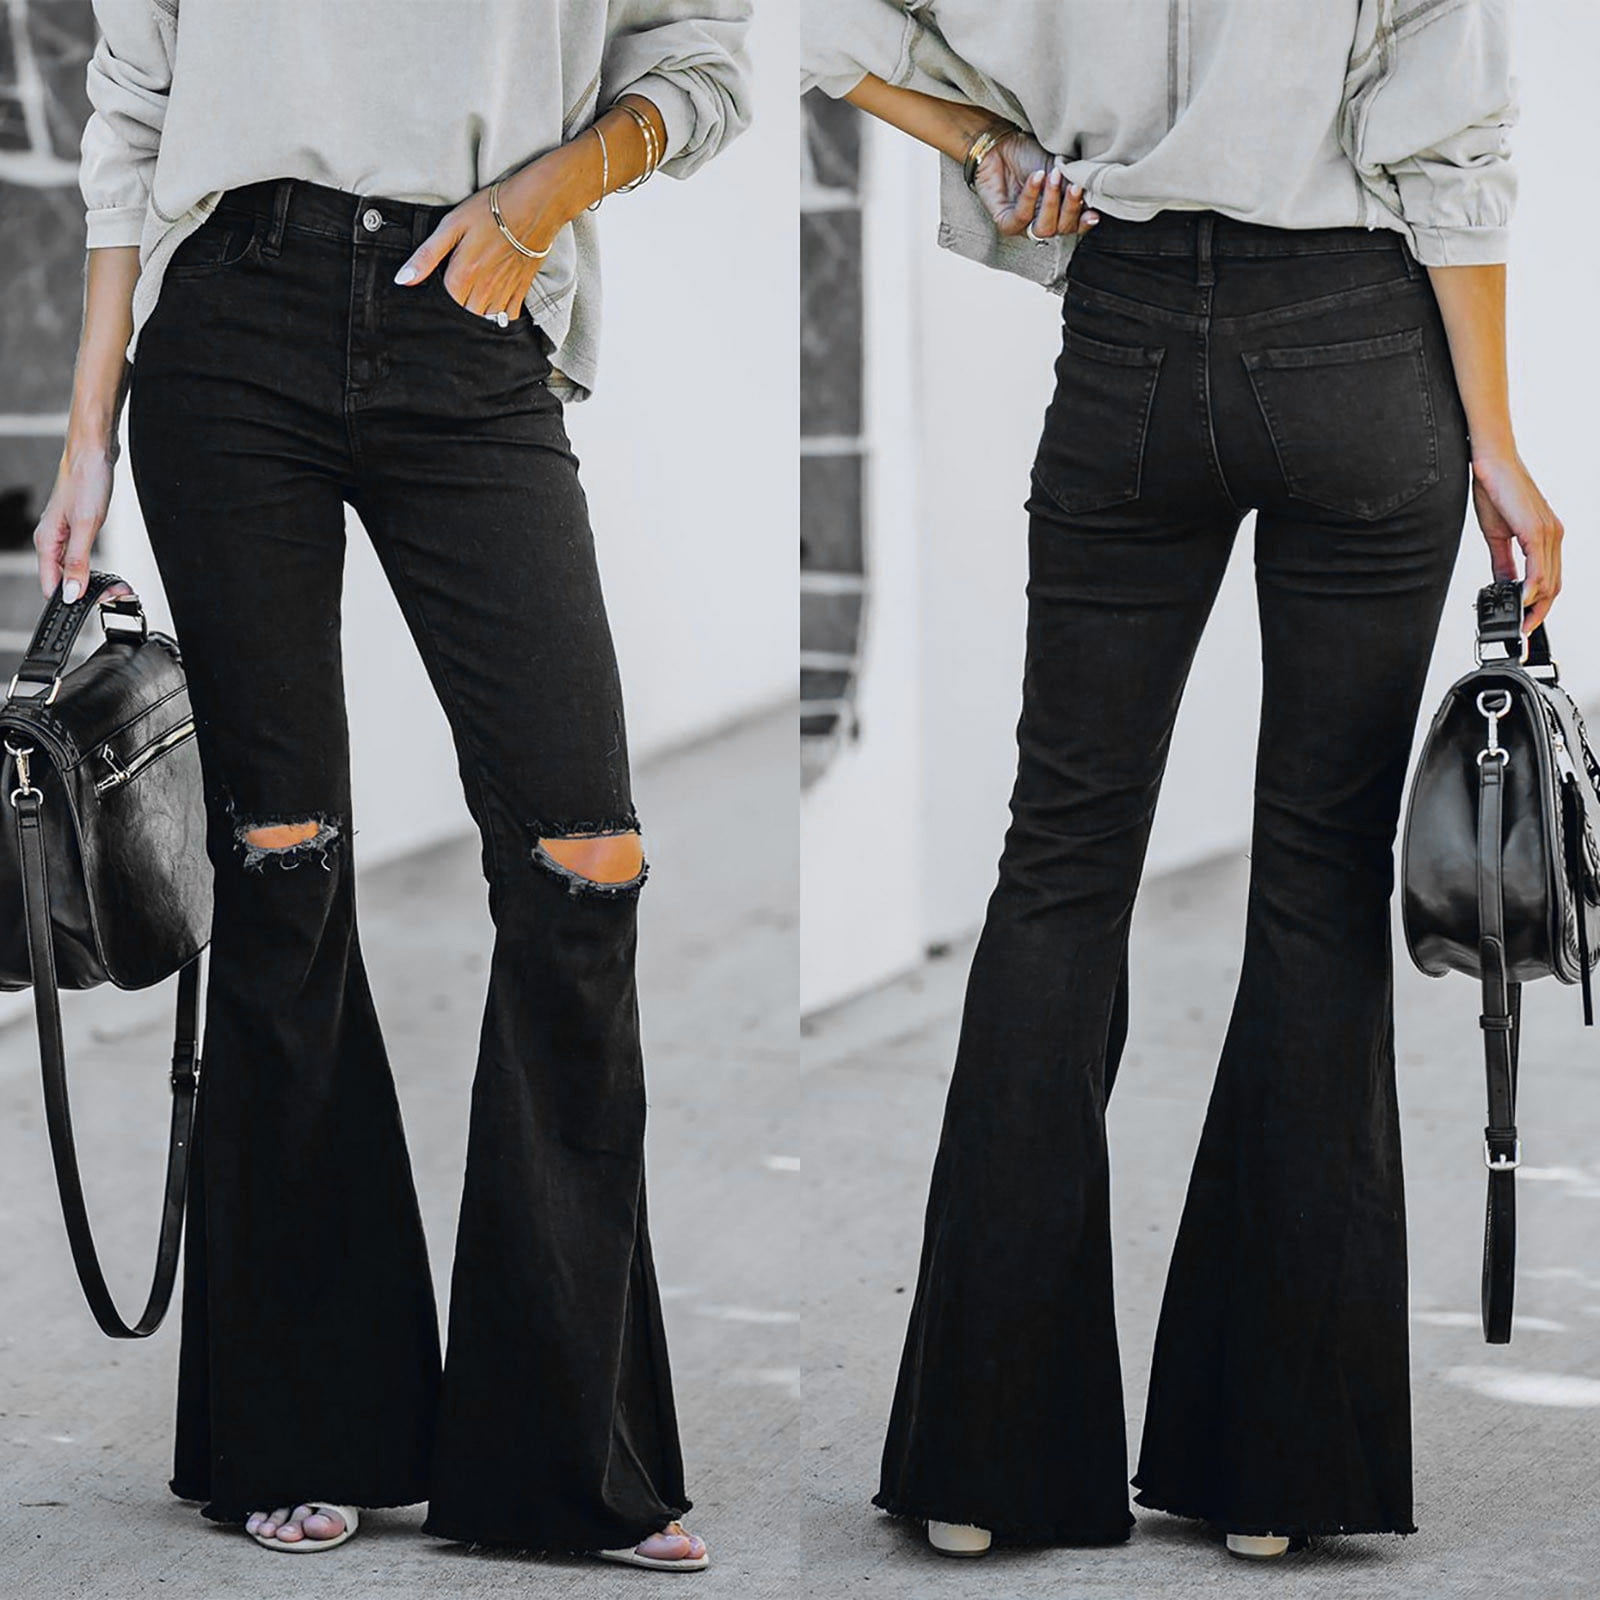 Styling Black Flare Jeans: Day 4